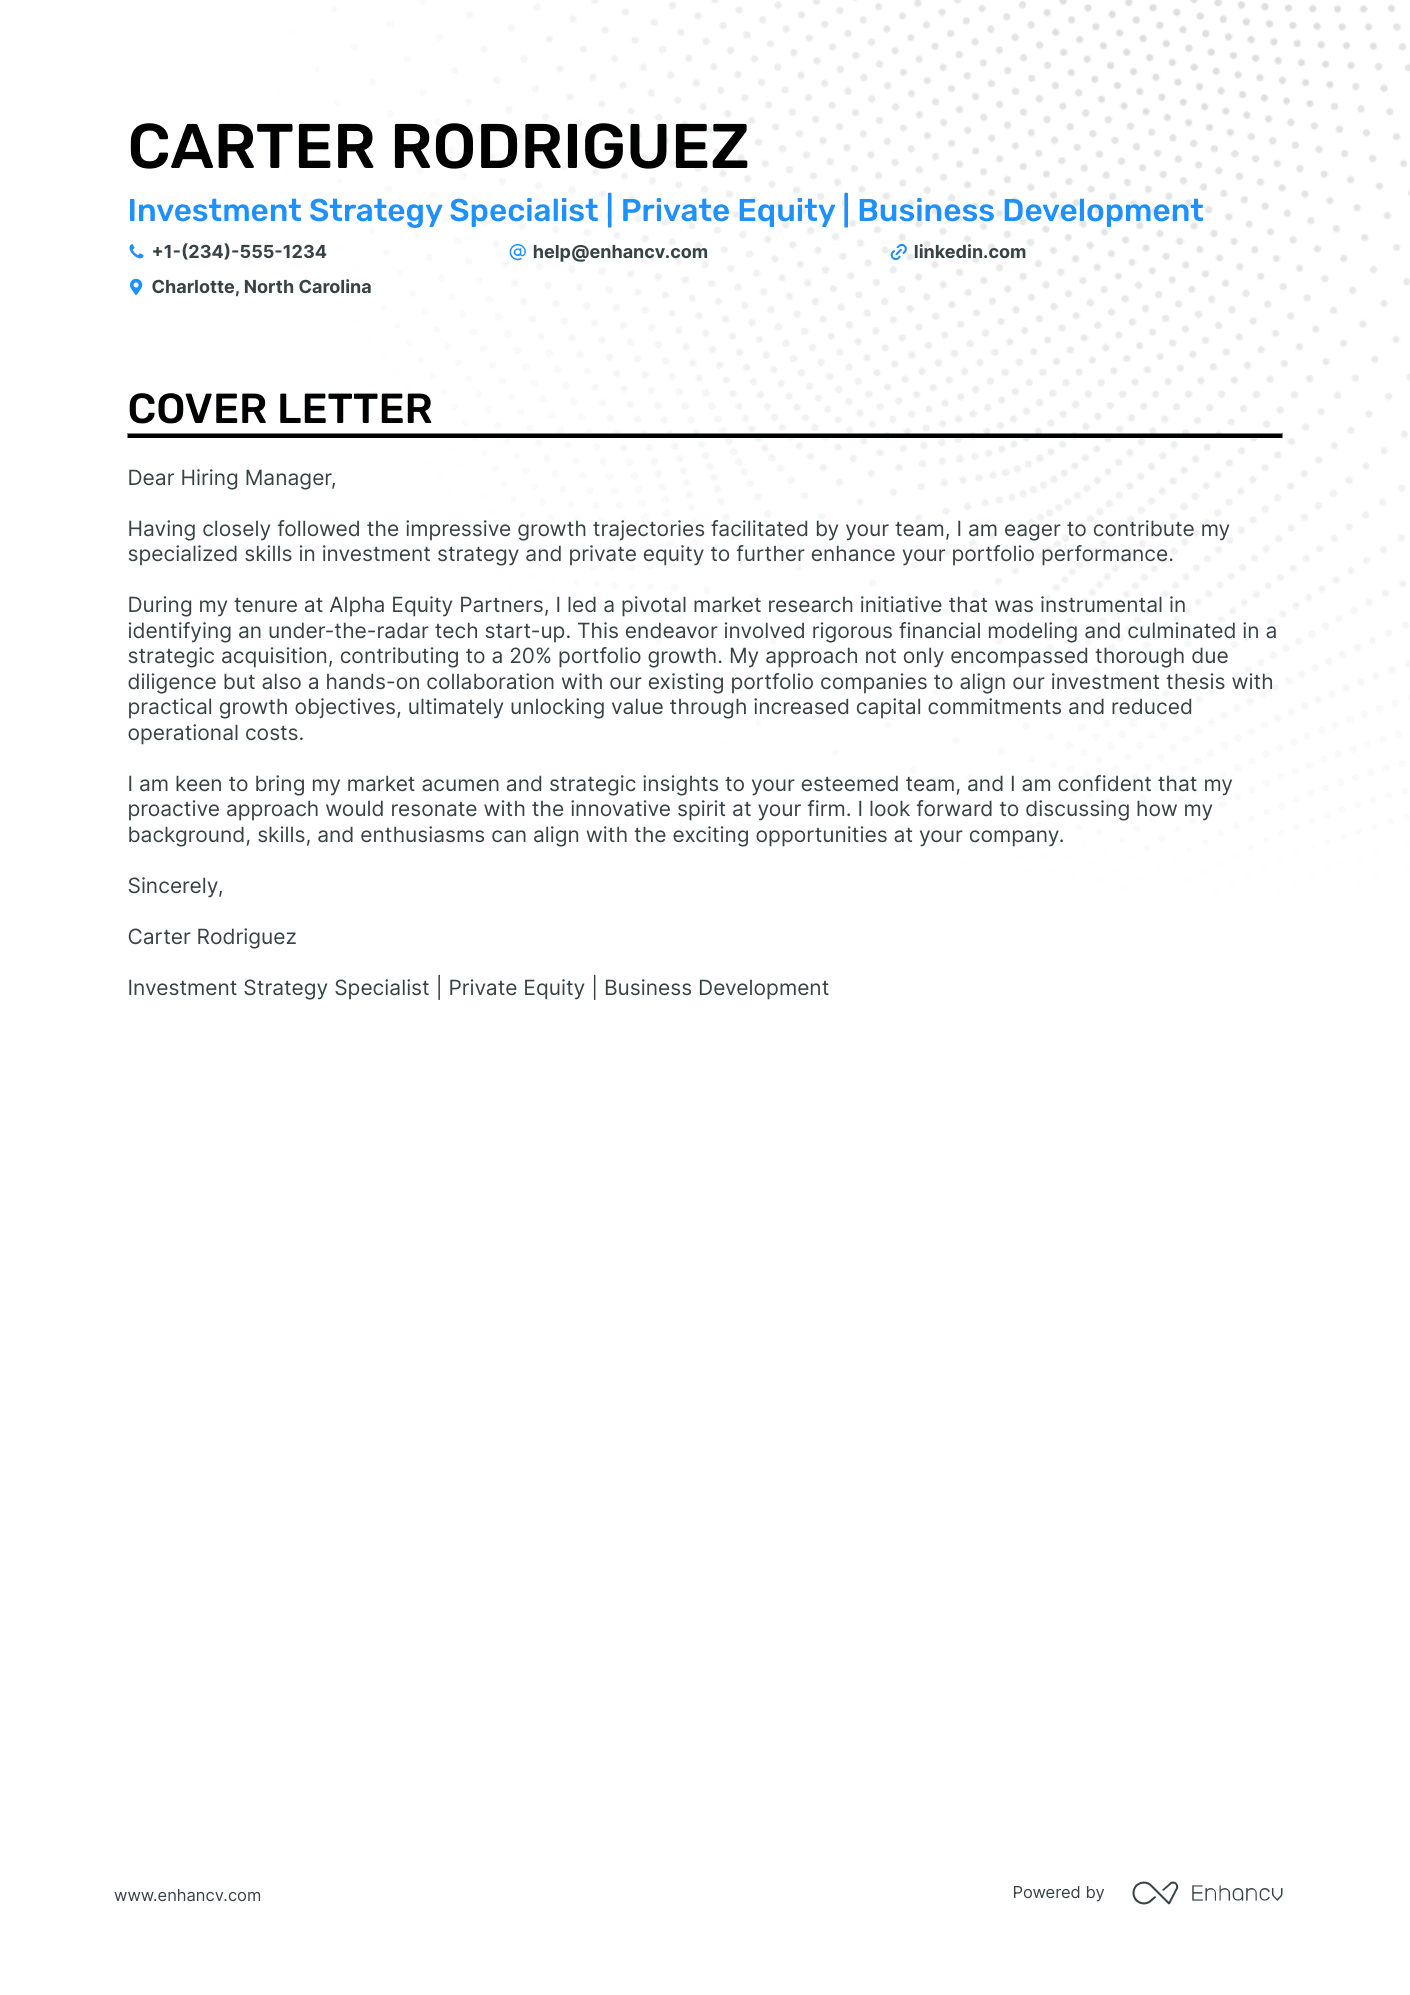 Private Equity cover letter